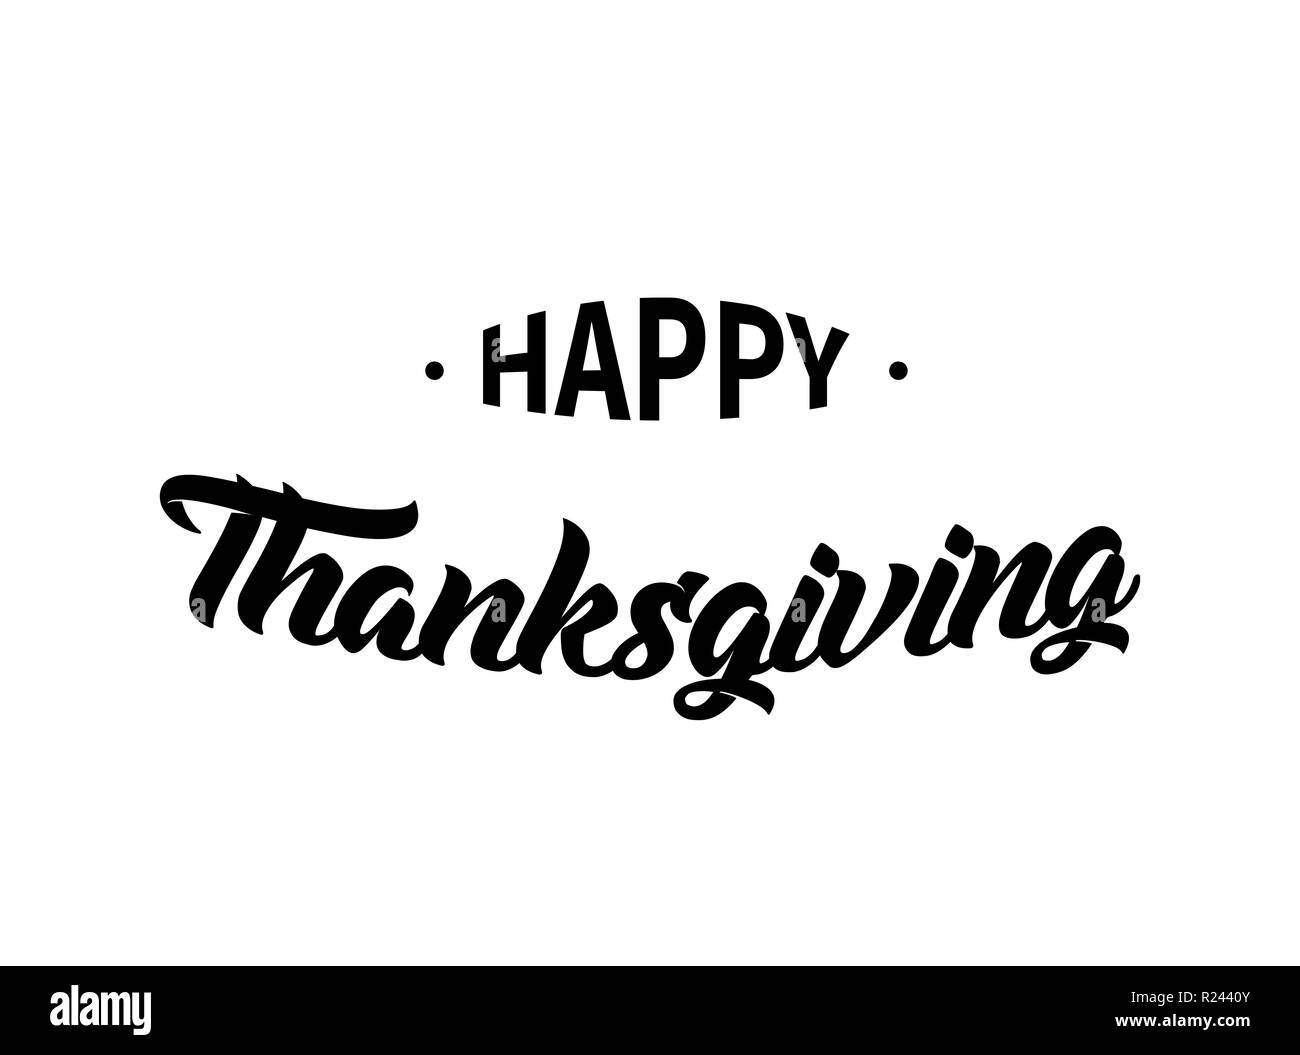 Happy Thanksgiving black text on white background, typography poster ...